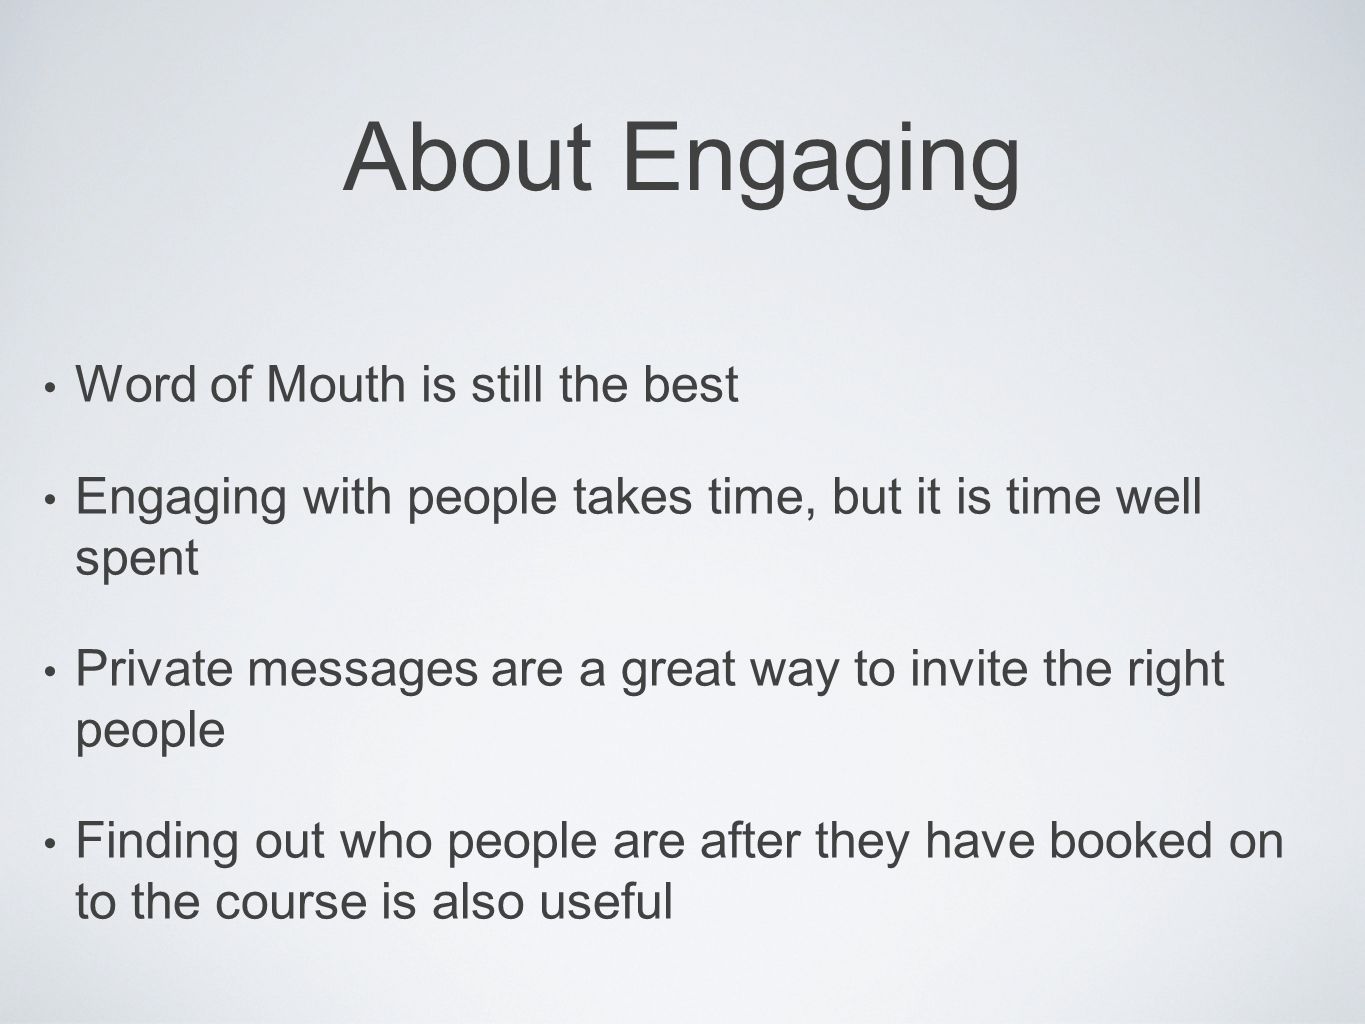 About Engaging Word of Mouth is still the best Engaging with people takes time, but it is time well spent Private messages are a great way to invite the right people Finding out who people are after they have booked on to the course is also useful